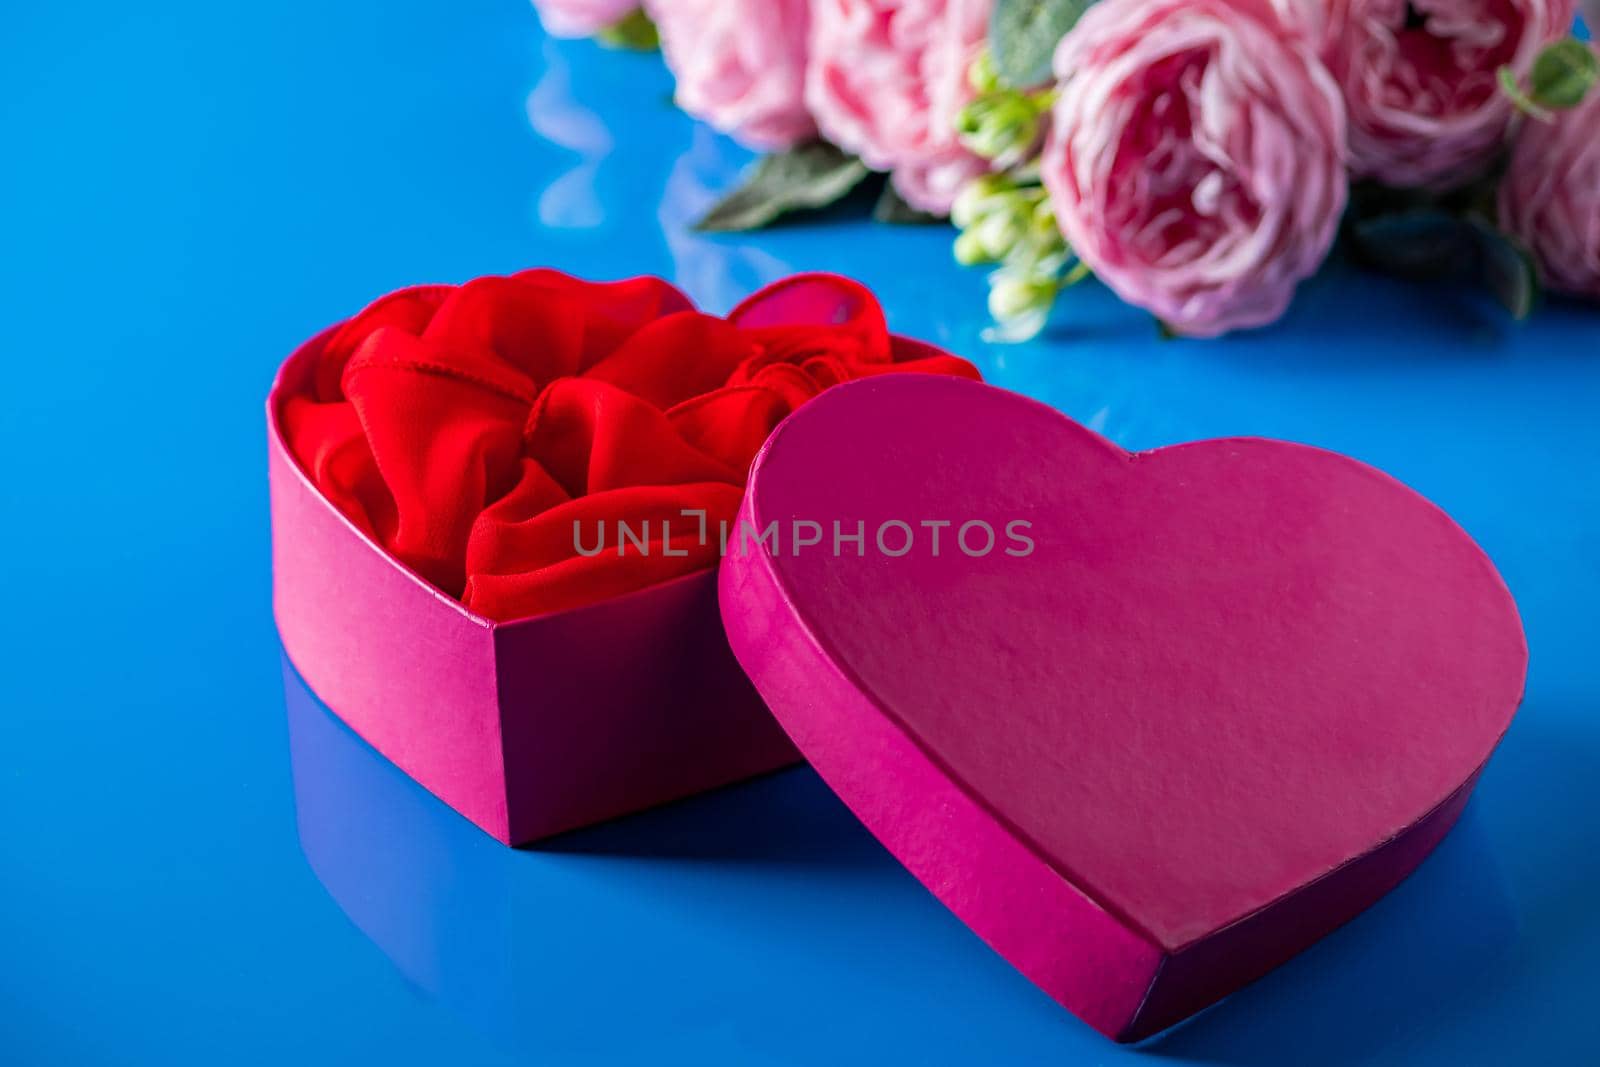 Heart shaped open gift box on blue background. Gift for Valentine's Day. Open pink box in the shape of a heart and flowers close-up.